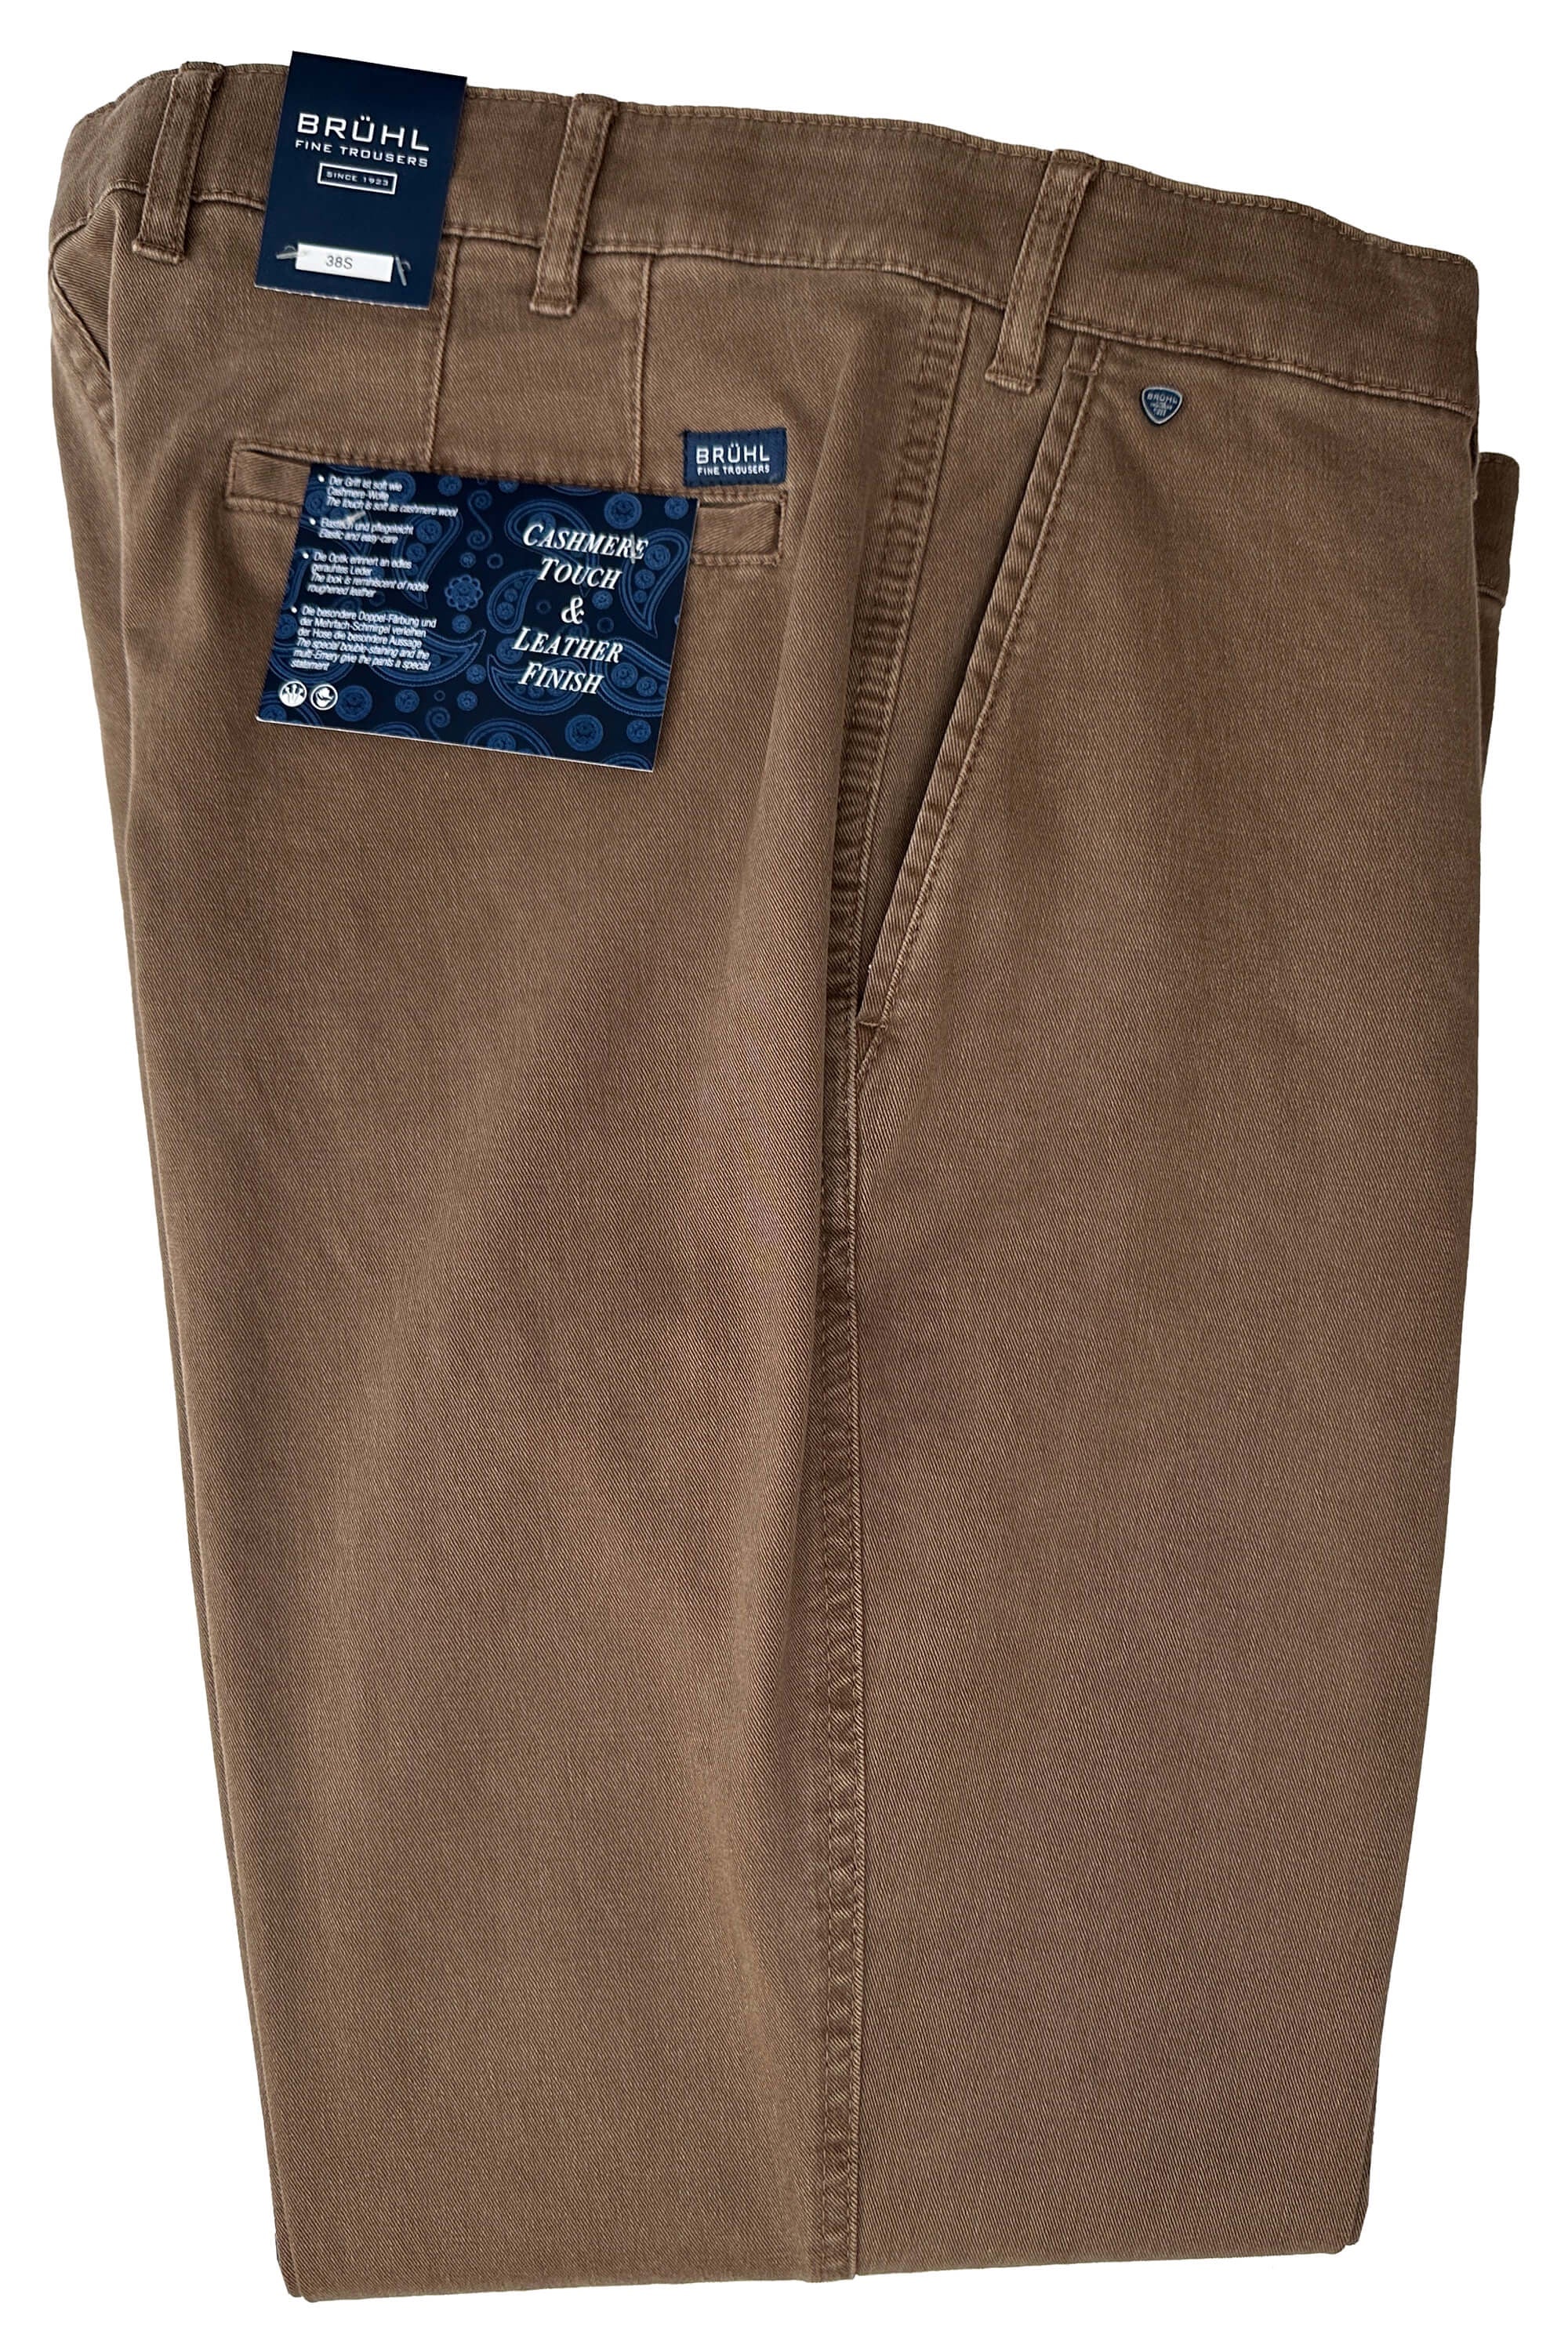 Bruhl Montana Cashmere Touch Trousers Putty